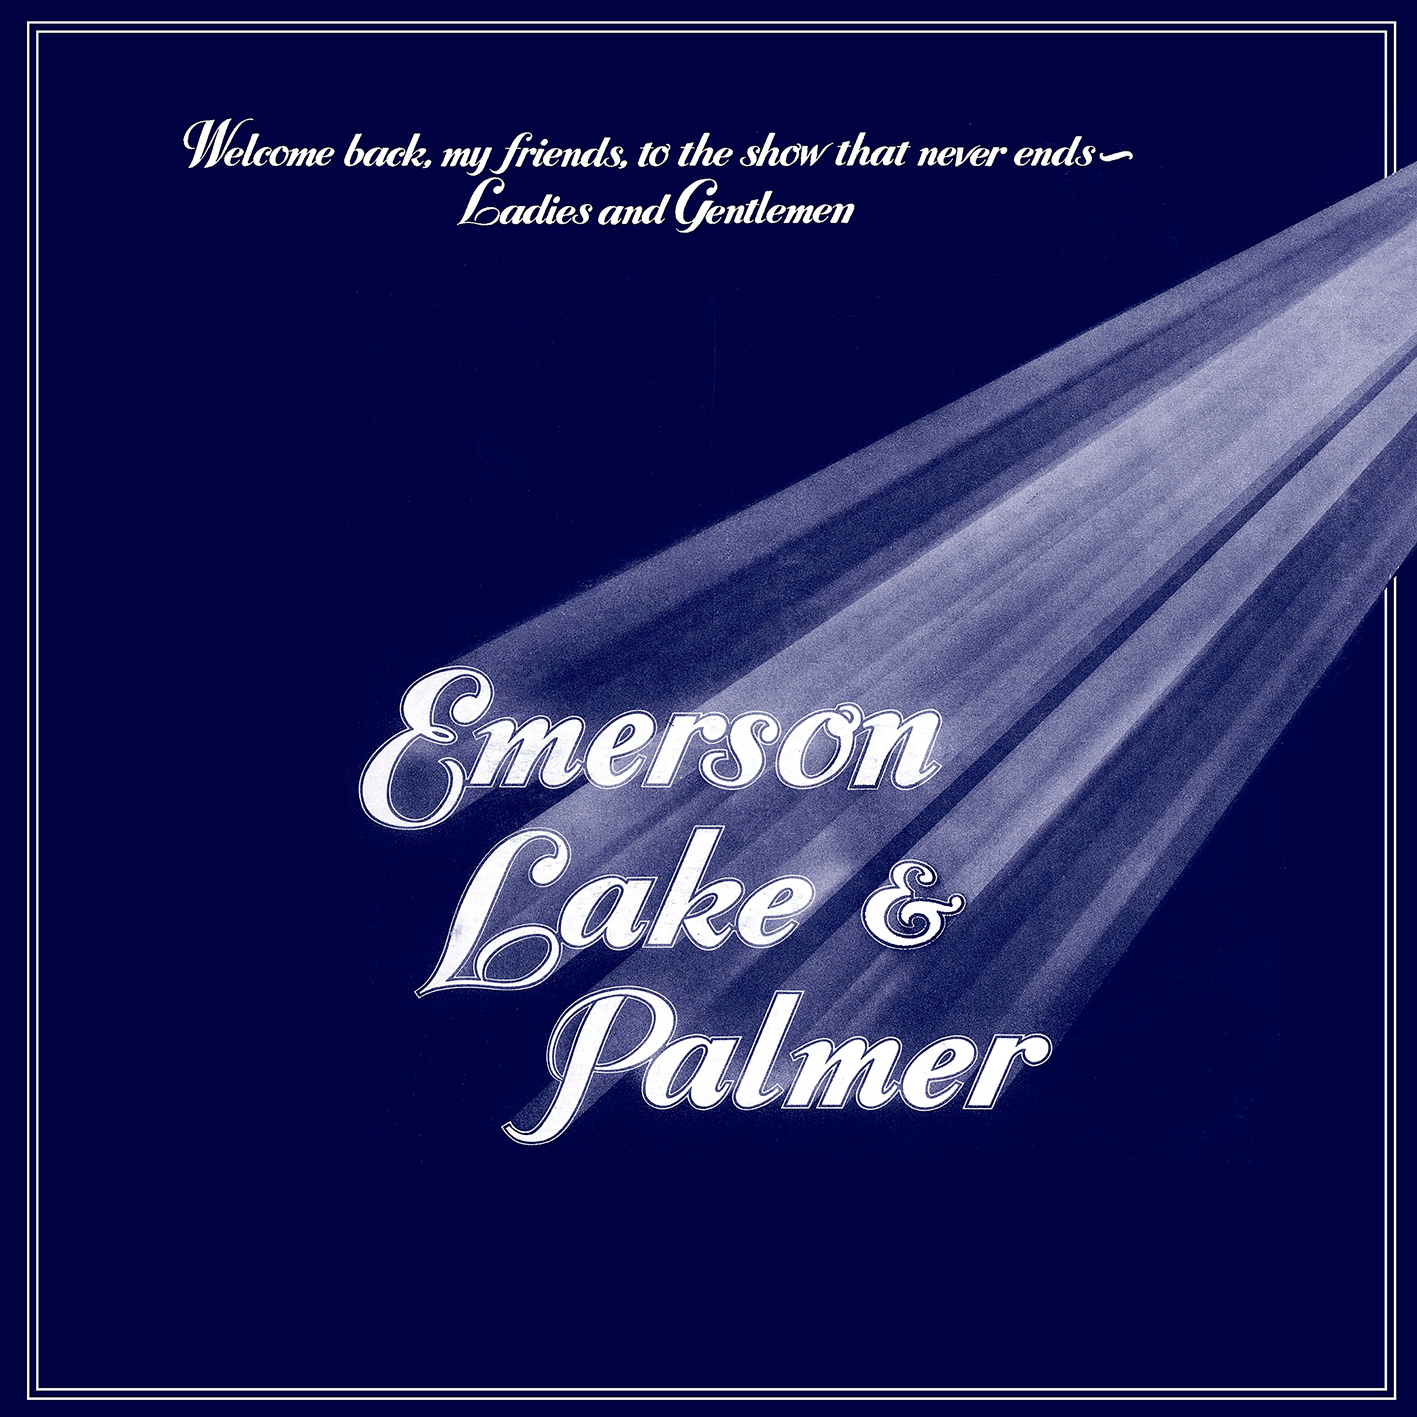 Emerson, Lake & Palmer - Welcome Back My Friends To The Show That Never Ends (1974/2016) [HDTracks FLAC 24bit/96kHz]